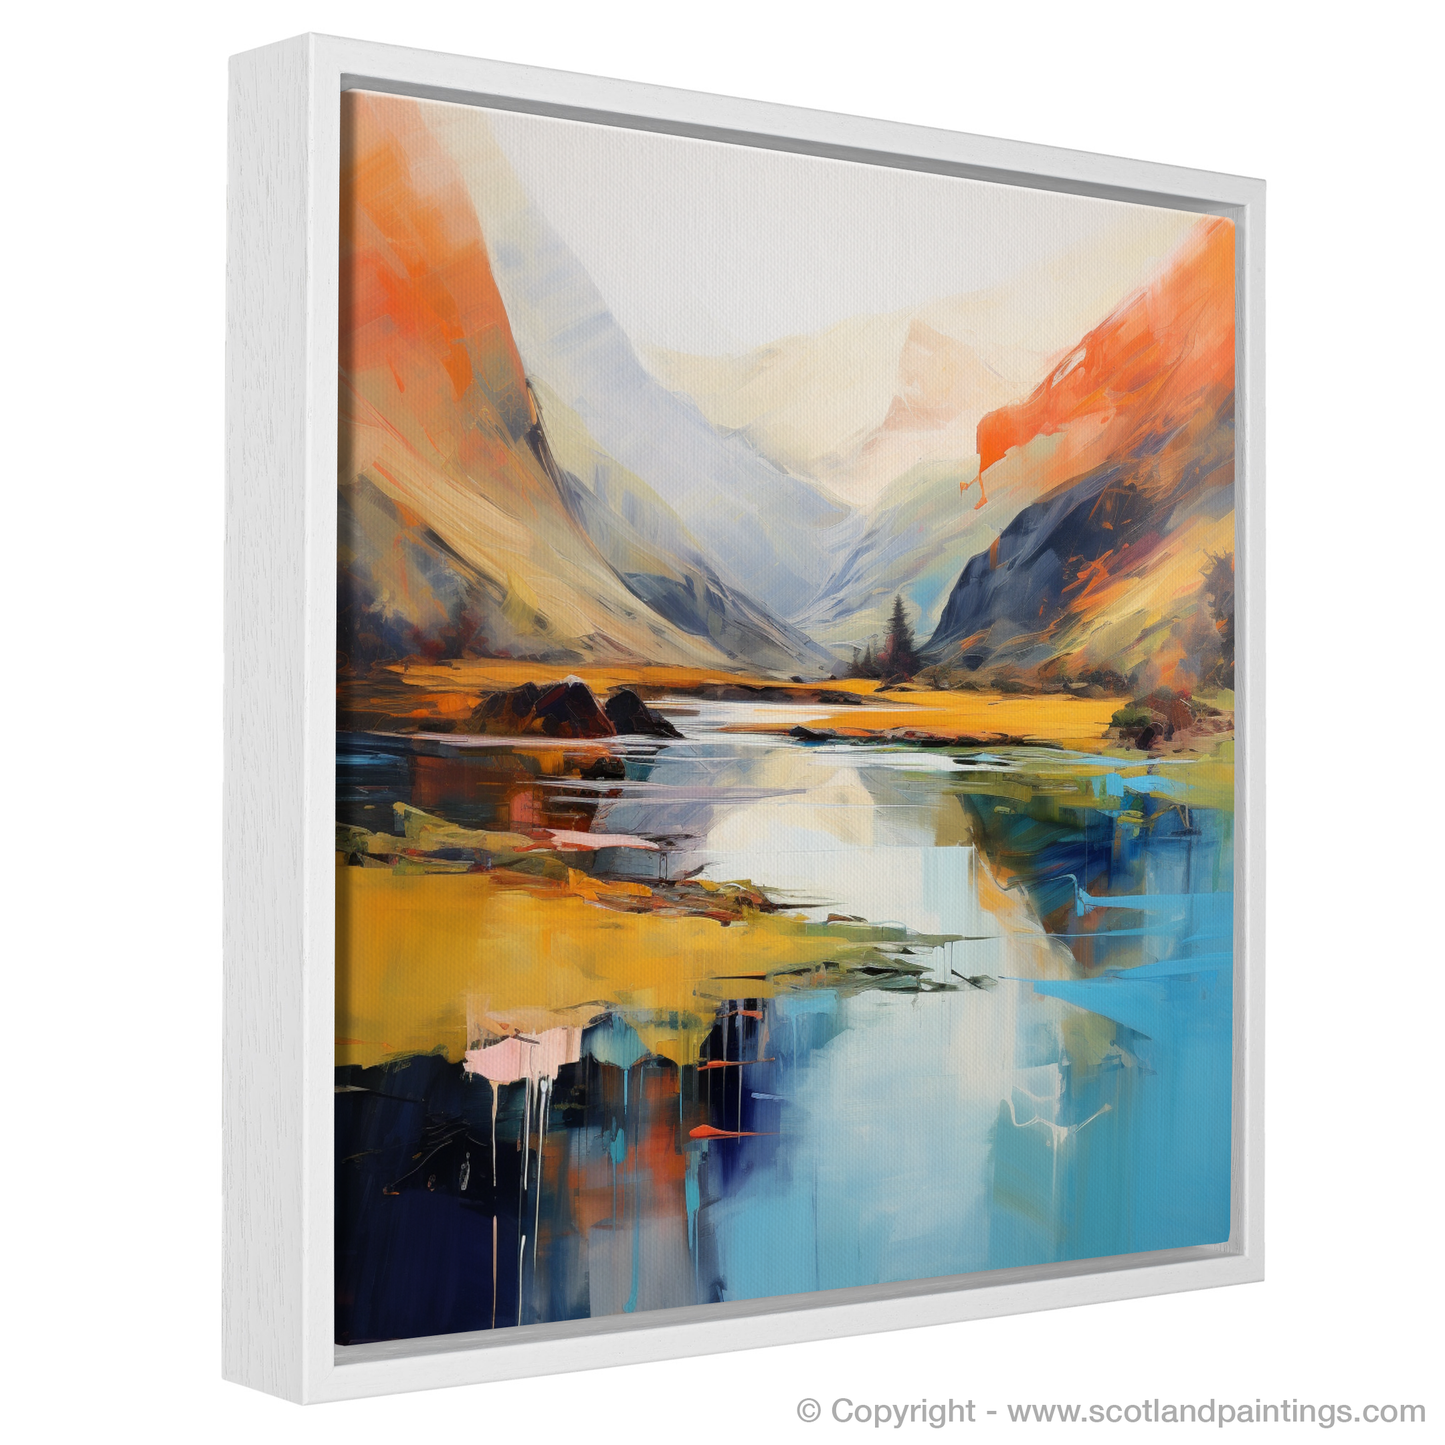 Reflections of Dusk and Dawn in Glencoe